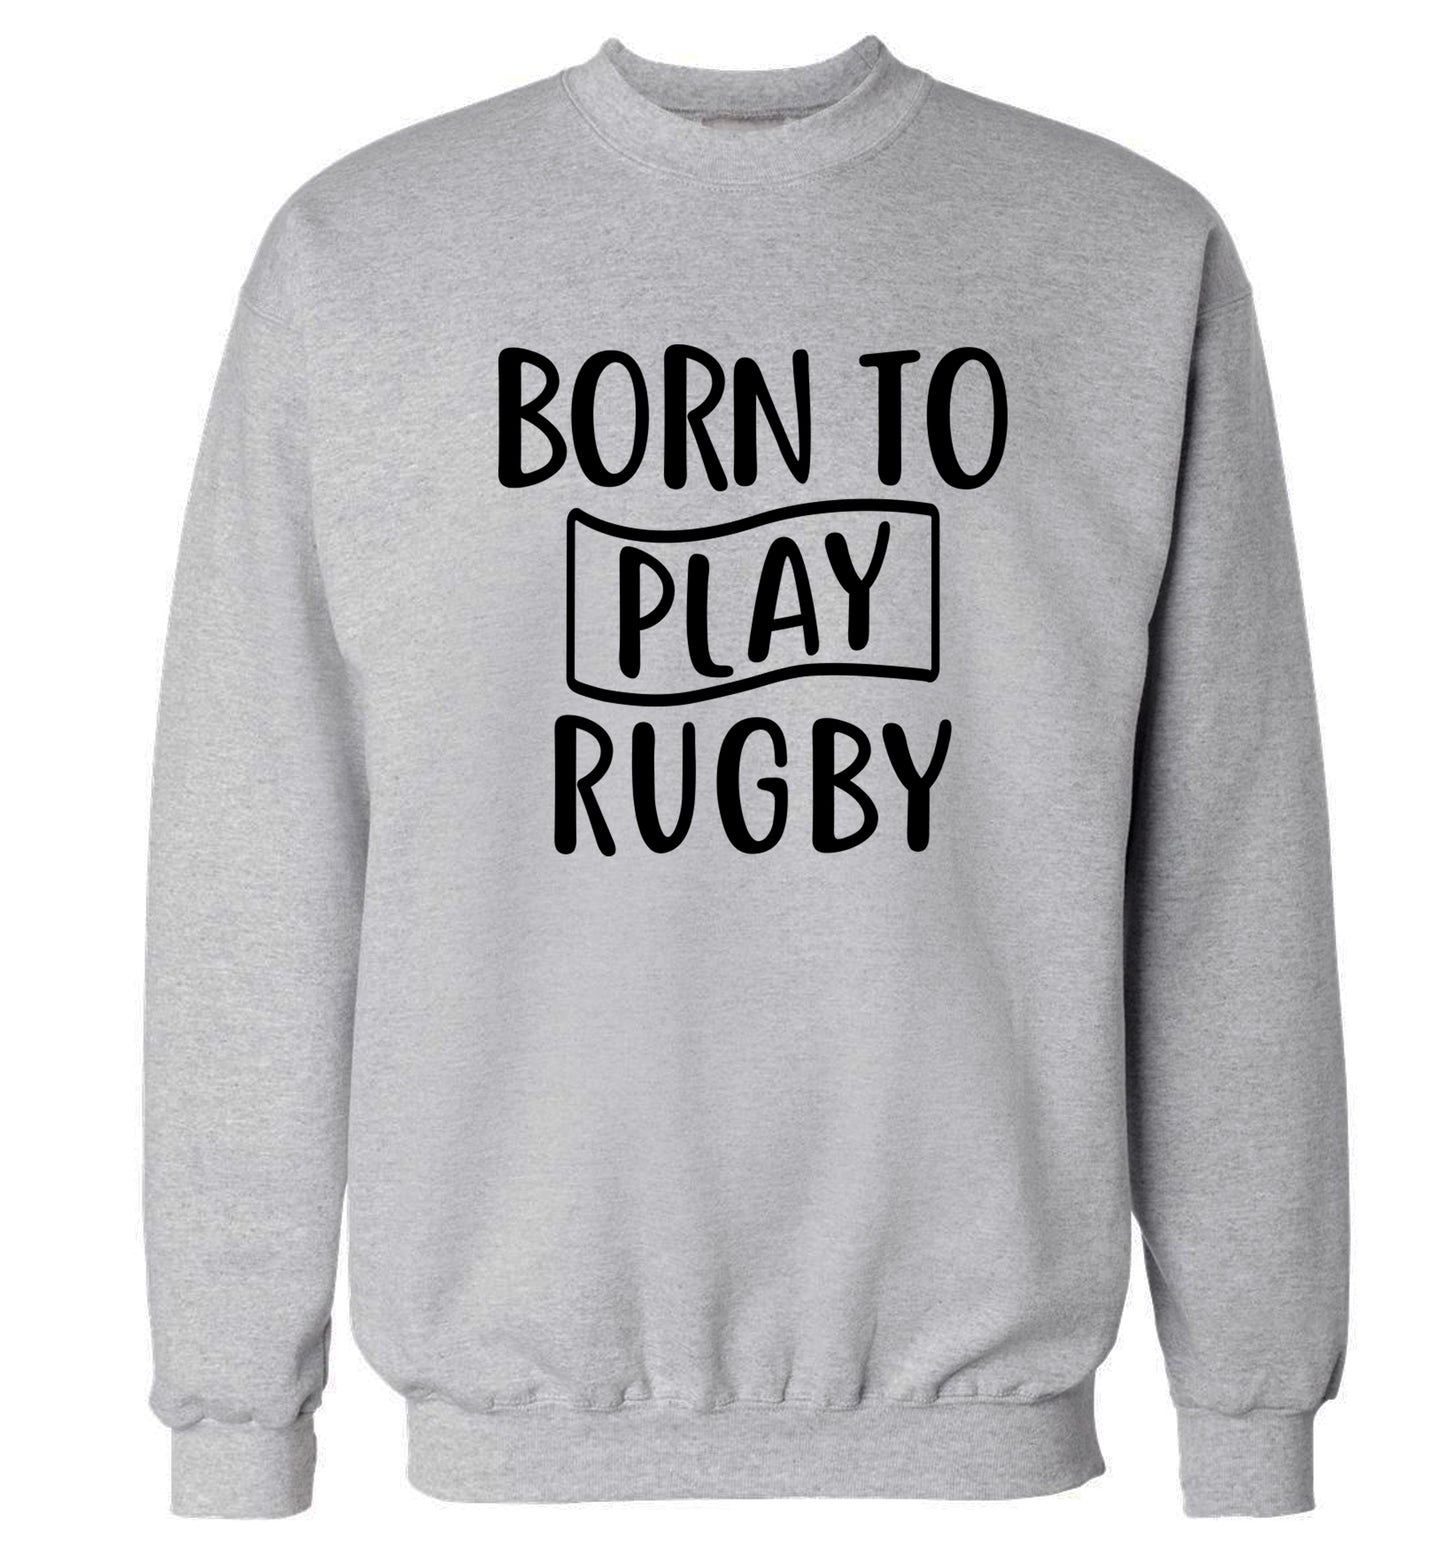 Born to play rugby Adult's unisex grey Sweater 2XL